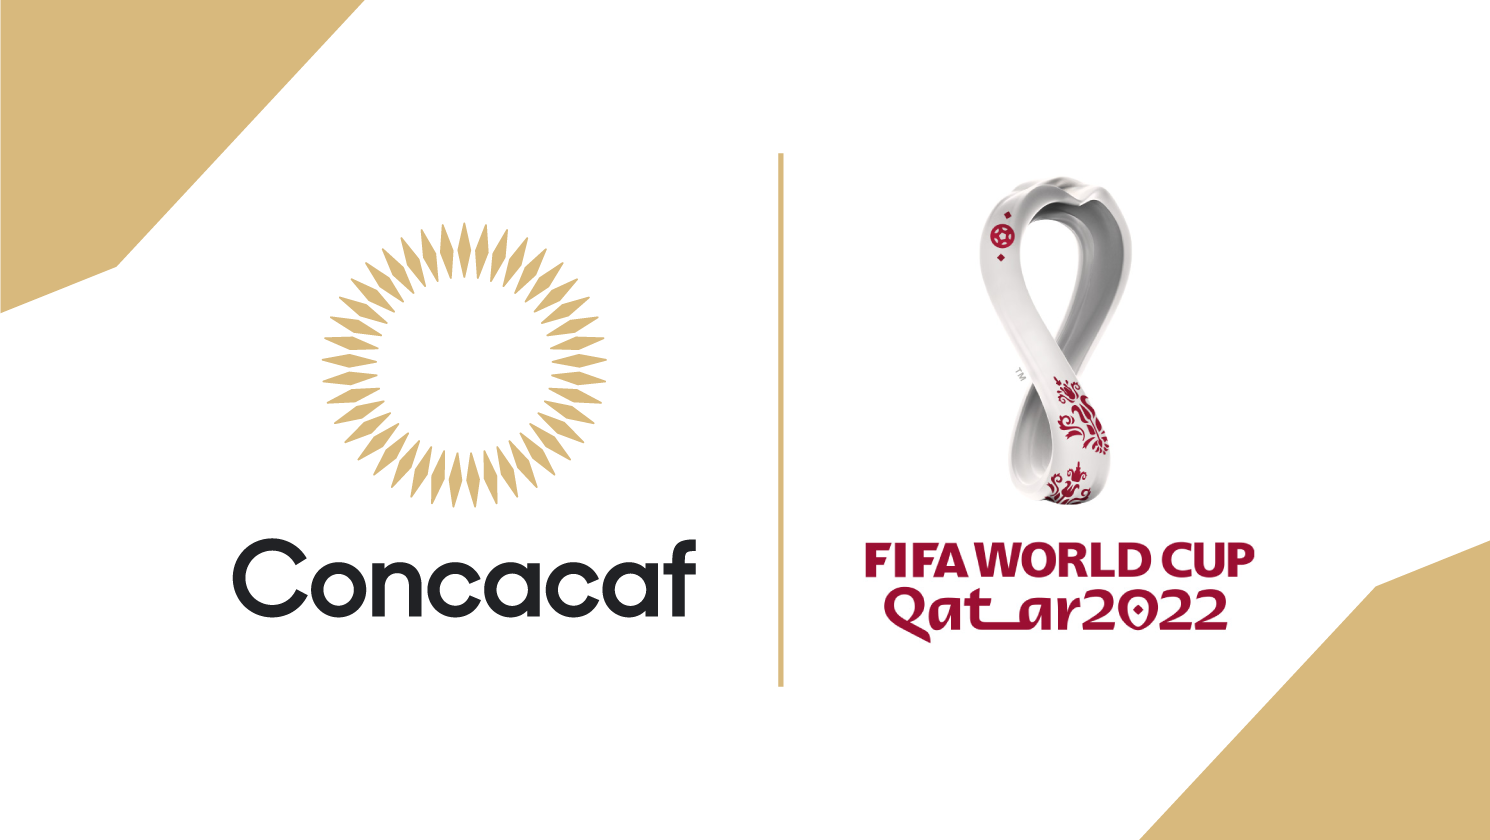 Update on the Concacaf Qualifiers for the FIFA World Cup Qatar 2022